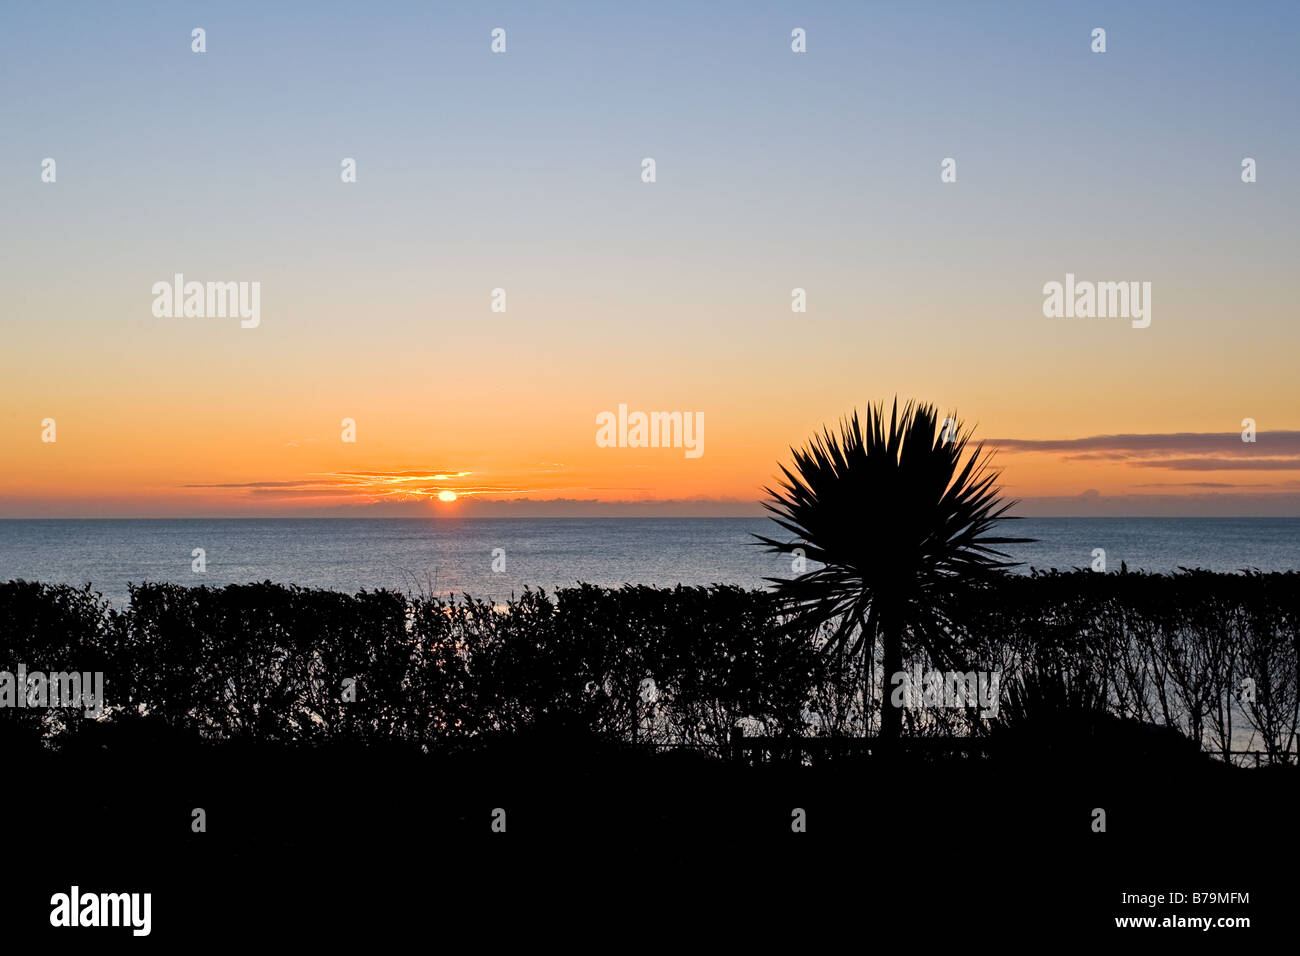 A silhouetted palm tree in the foreground of a calm morning sunrise on Eastbourne seafront. Stock Photo